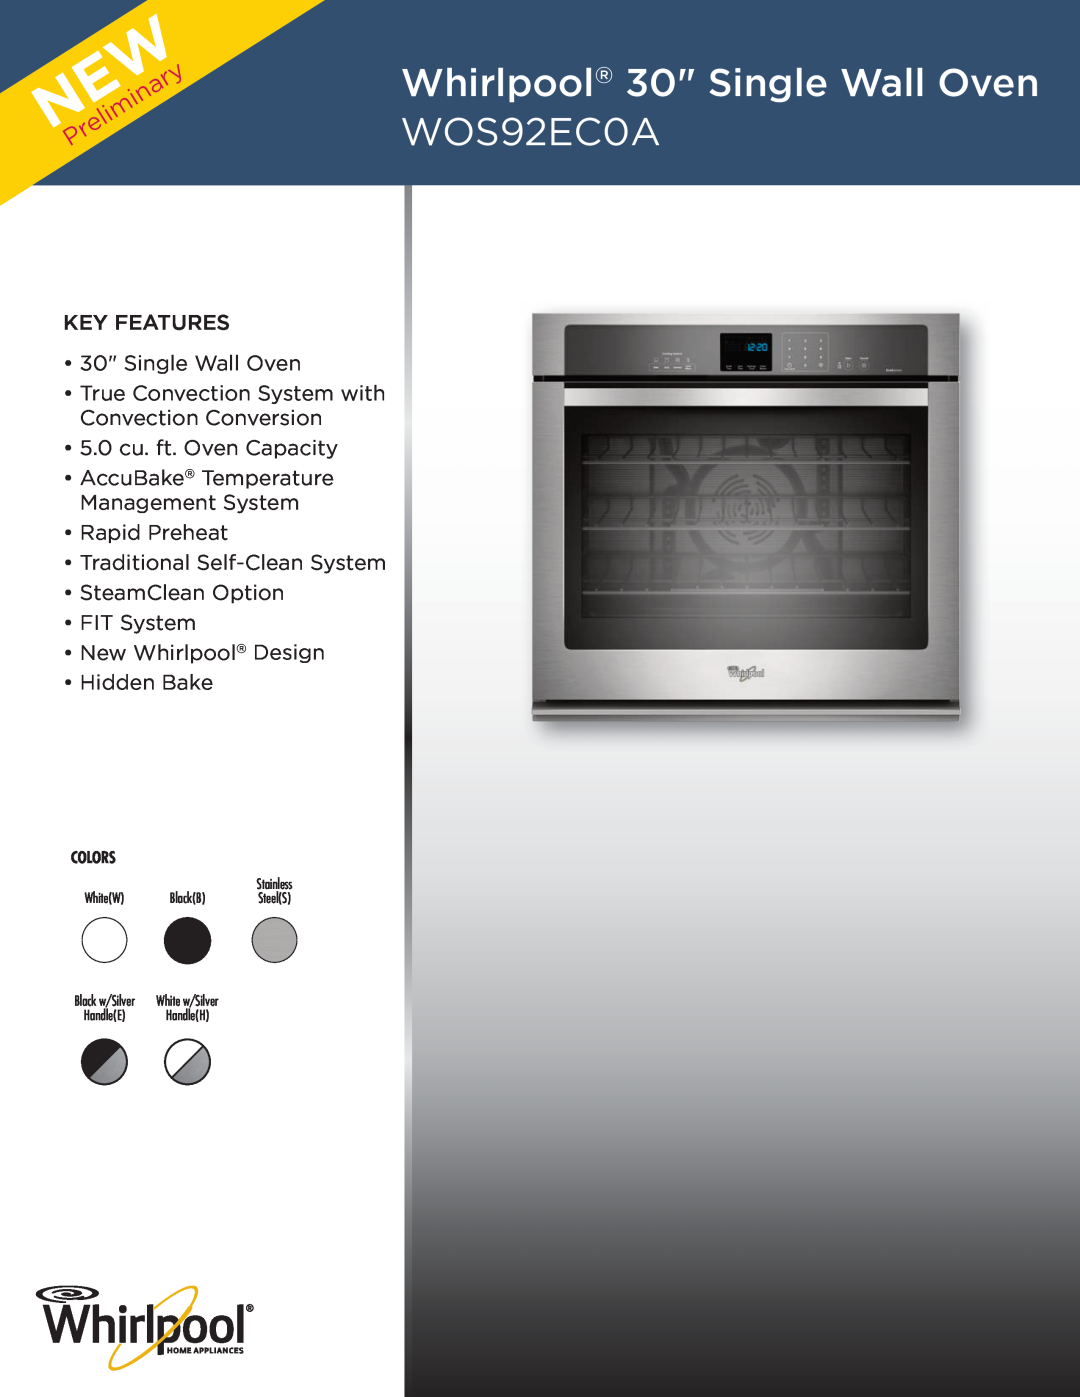 Whirlpool WOS51EC0A Whirlpool 30 Single Wall Oven WOS92EC0A, key features 30 Single Wall Oven, NEWPreliminary, Colors 